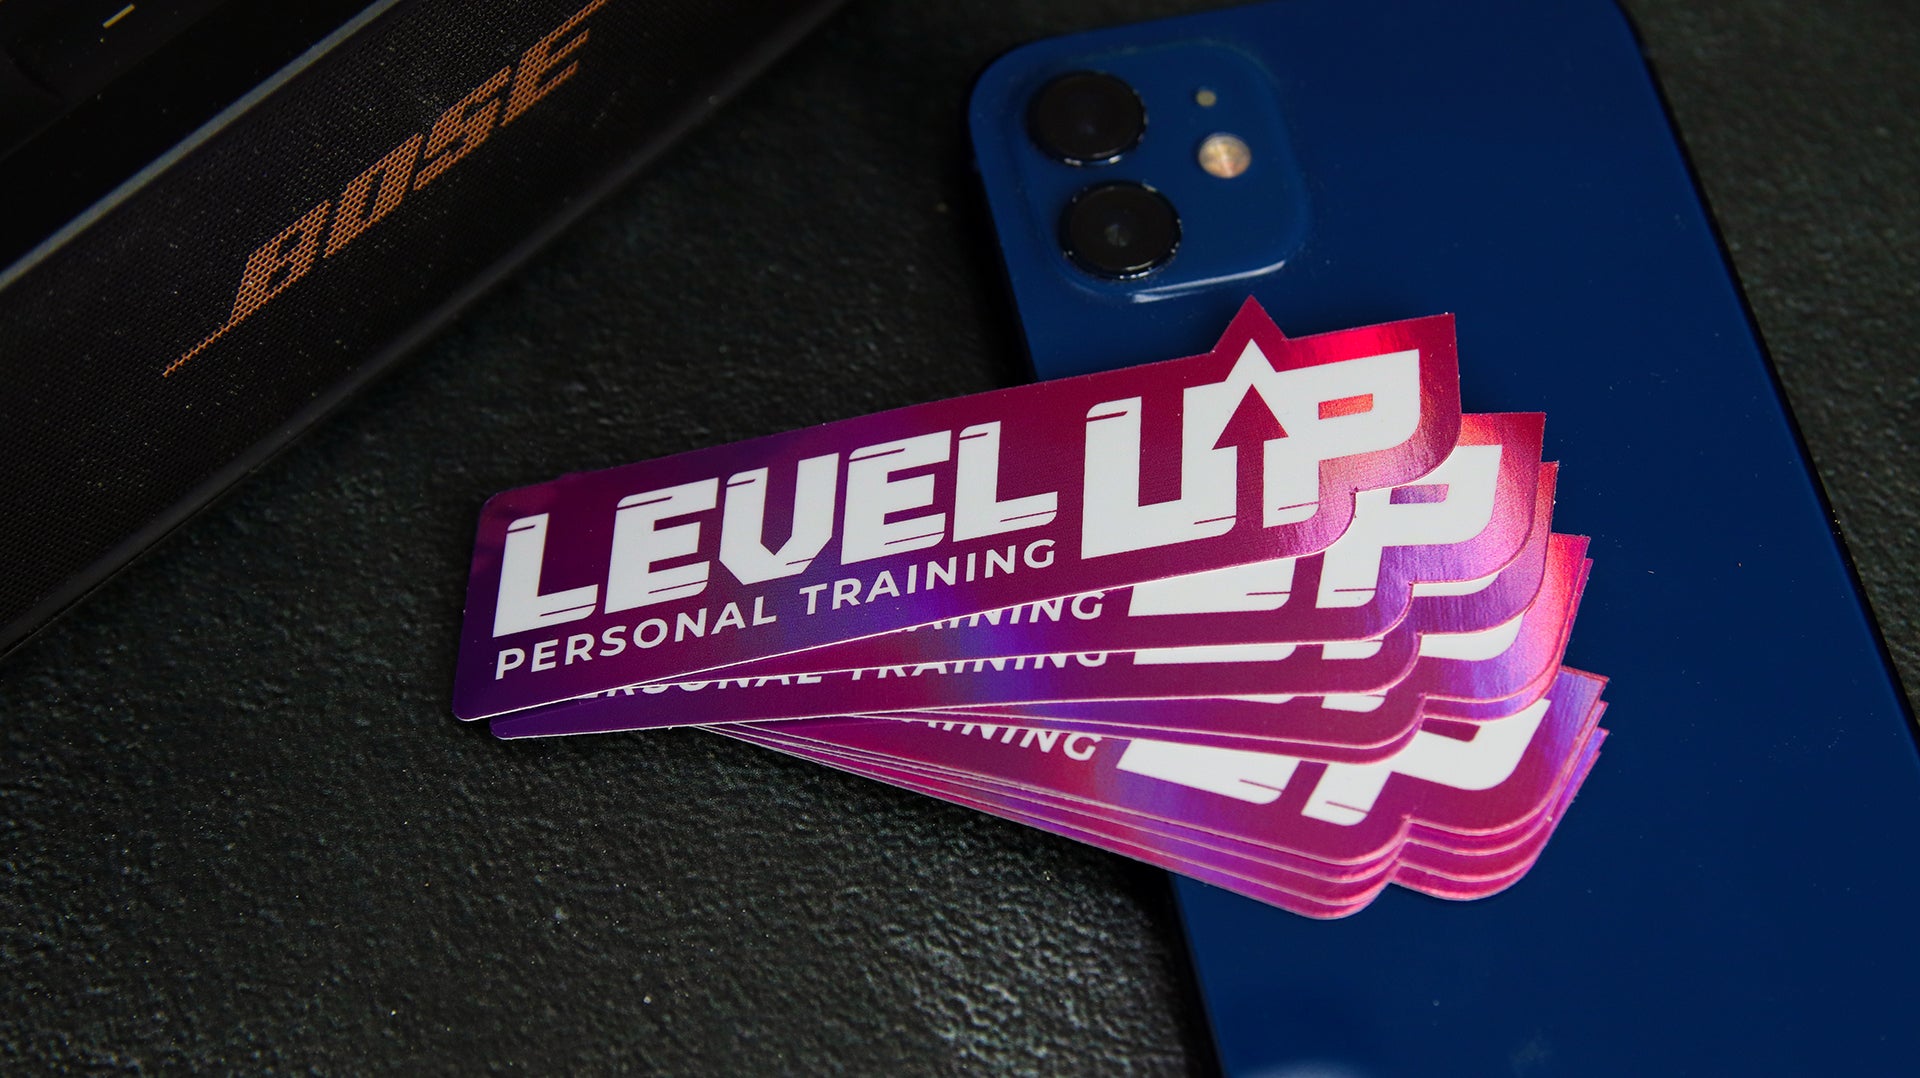 Stack of holographic die cut samples with level up logo